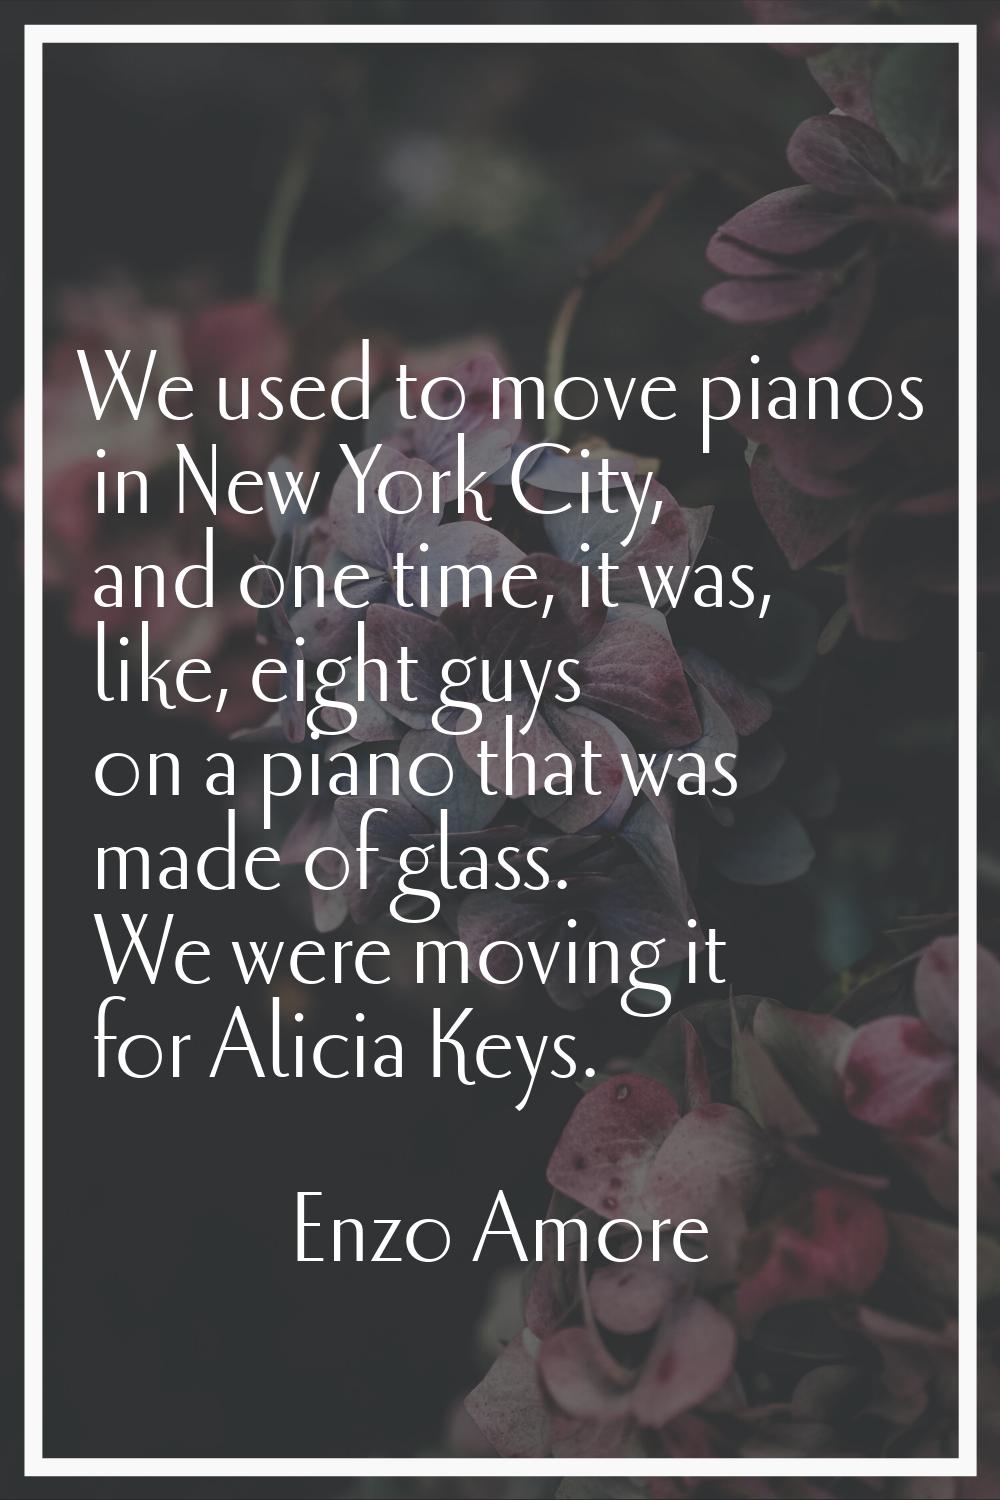 We used to move pianos in New York City, and one time, it was, like, eight guys on a piano that was